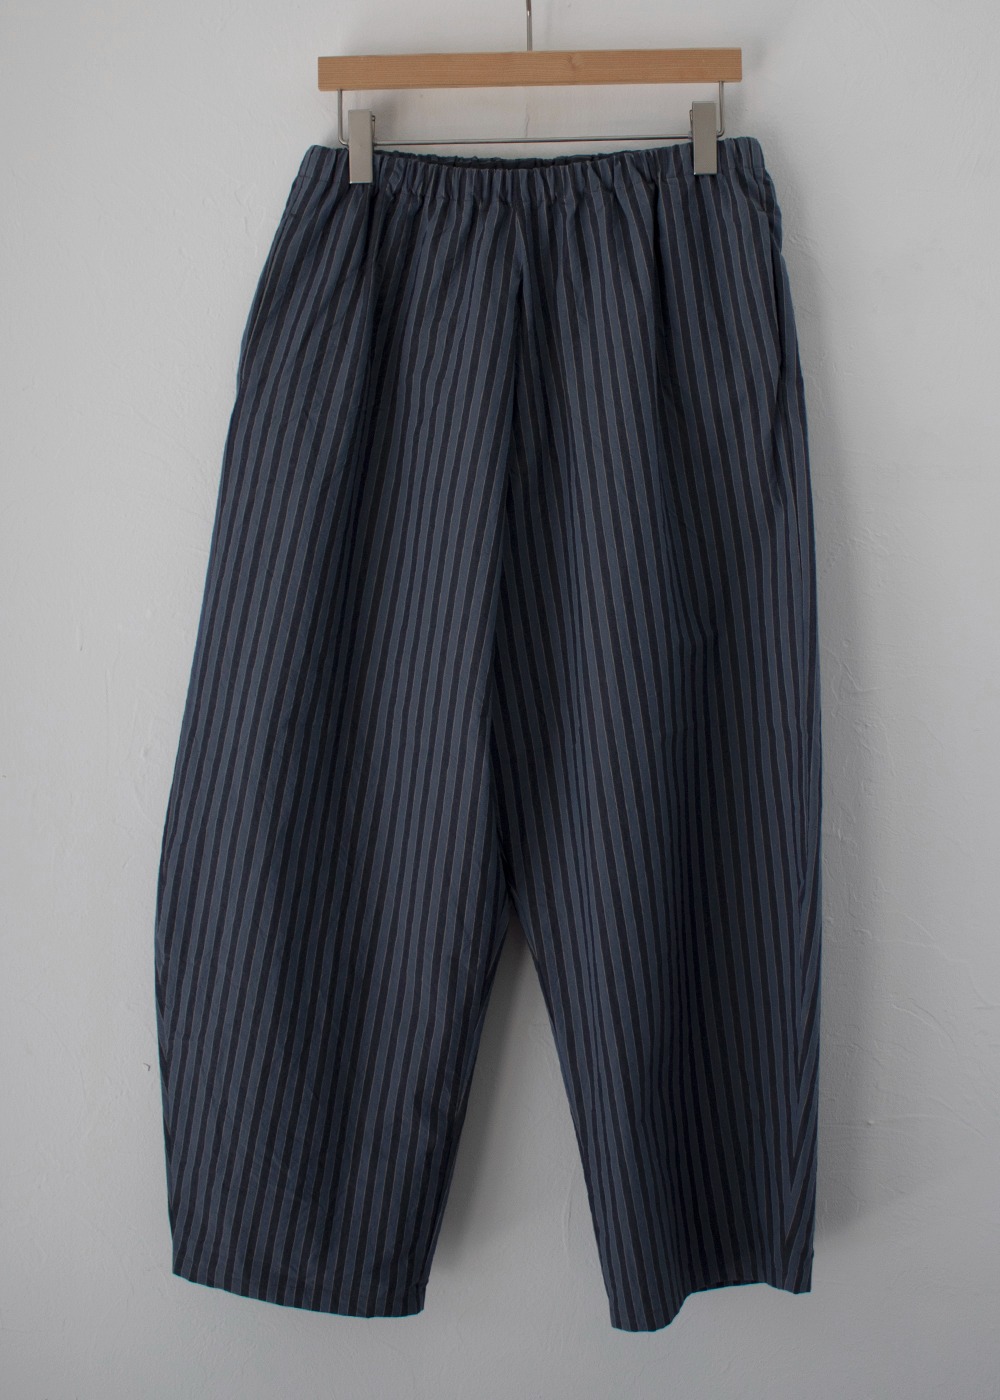 P540 Trousers